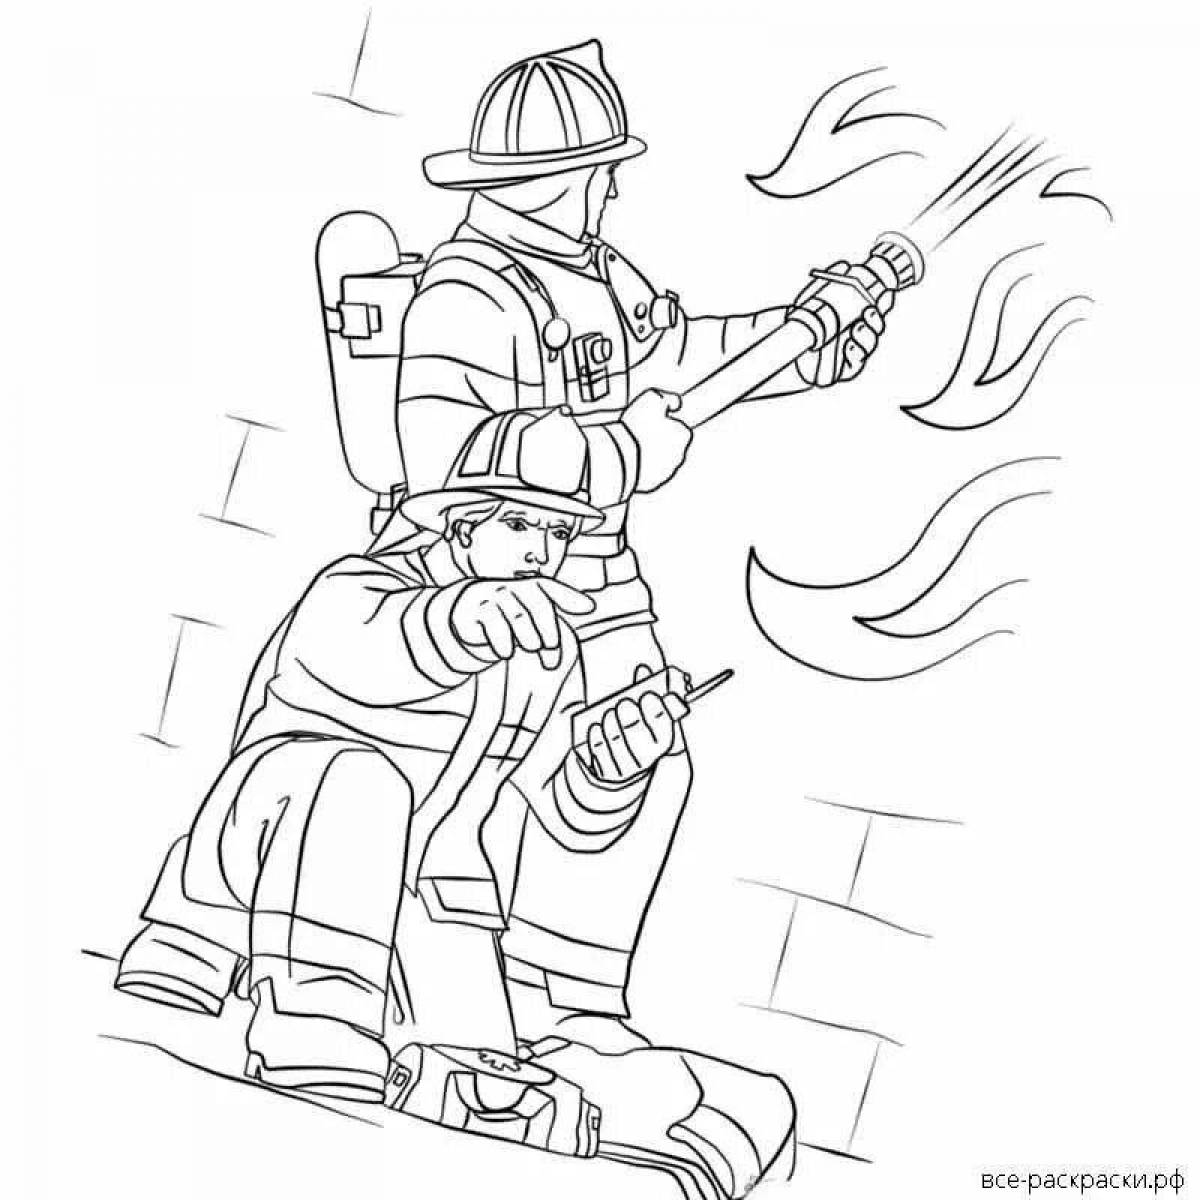 Great drawing of a fireman